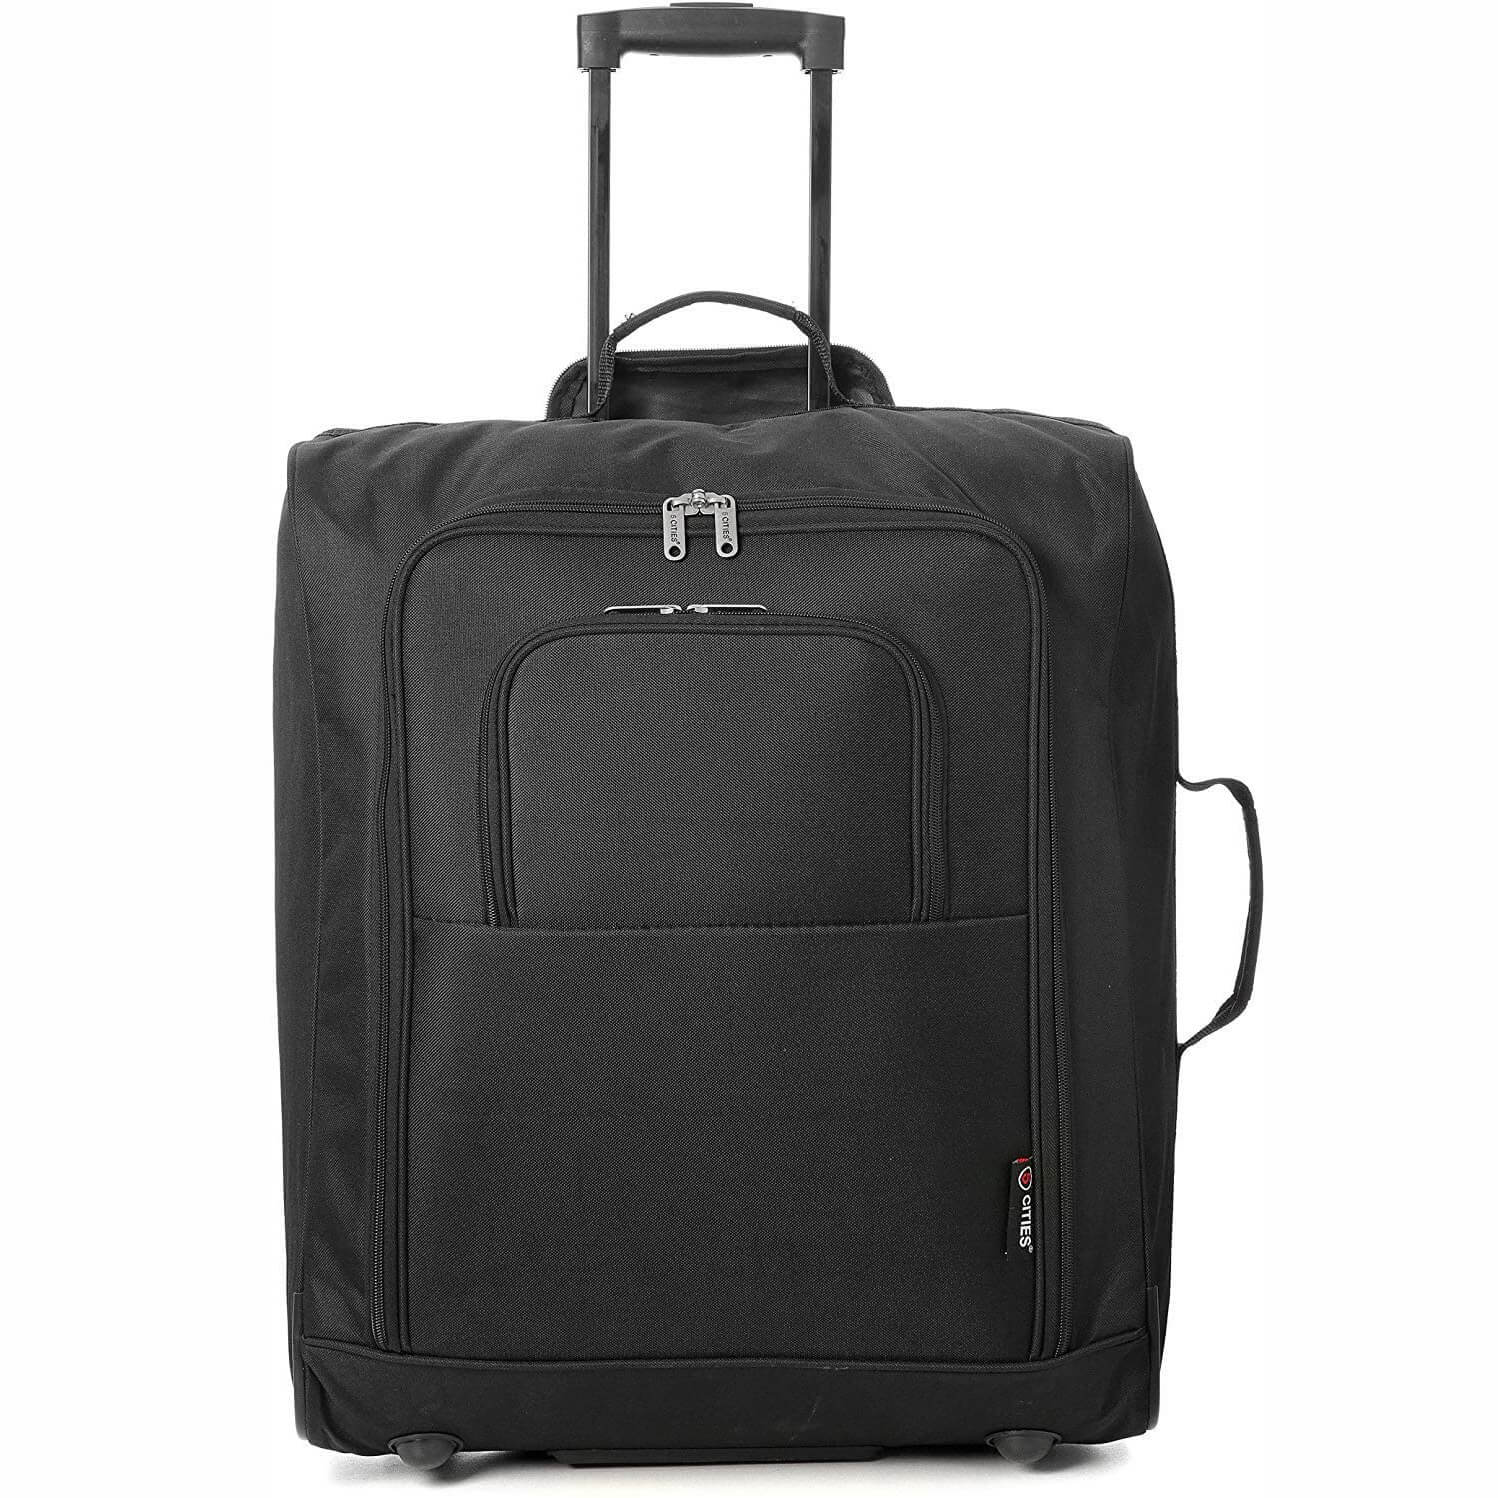 5 (56x45x25cm) Lightweight Cabin Luggage, Maximum Possible Travel Luggage & Bags